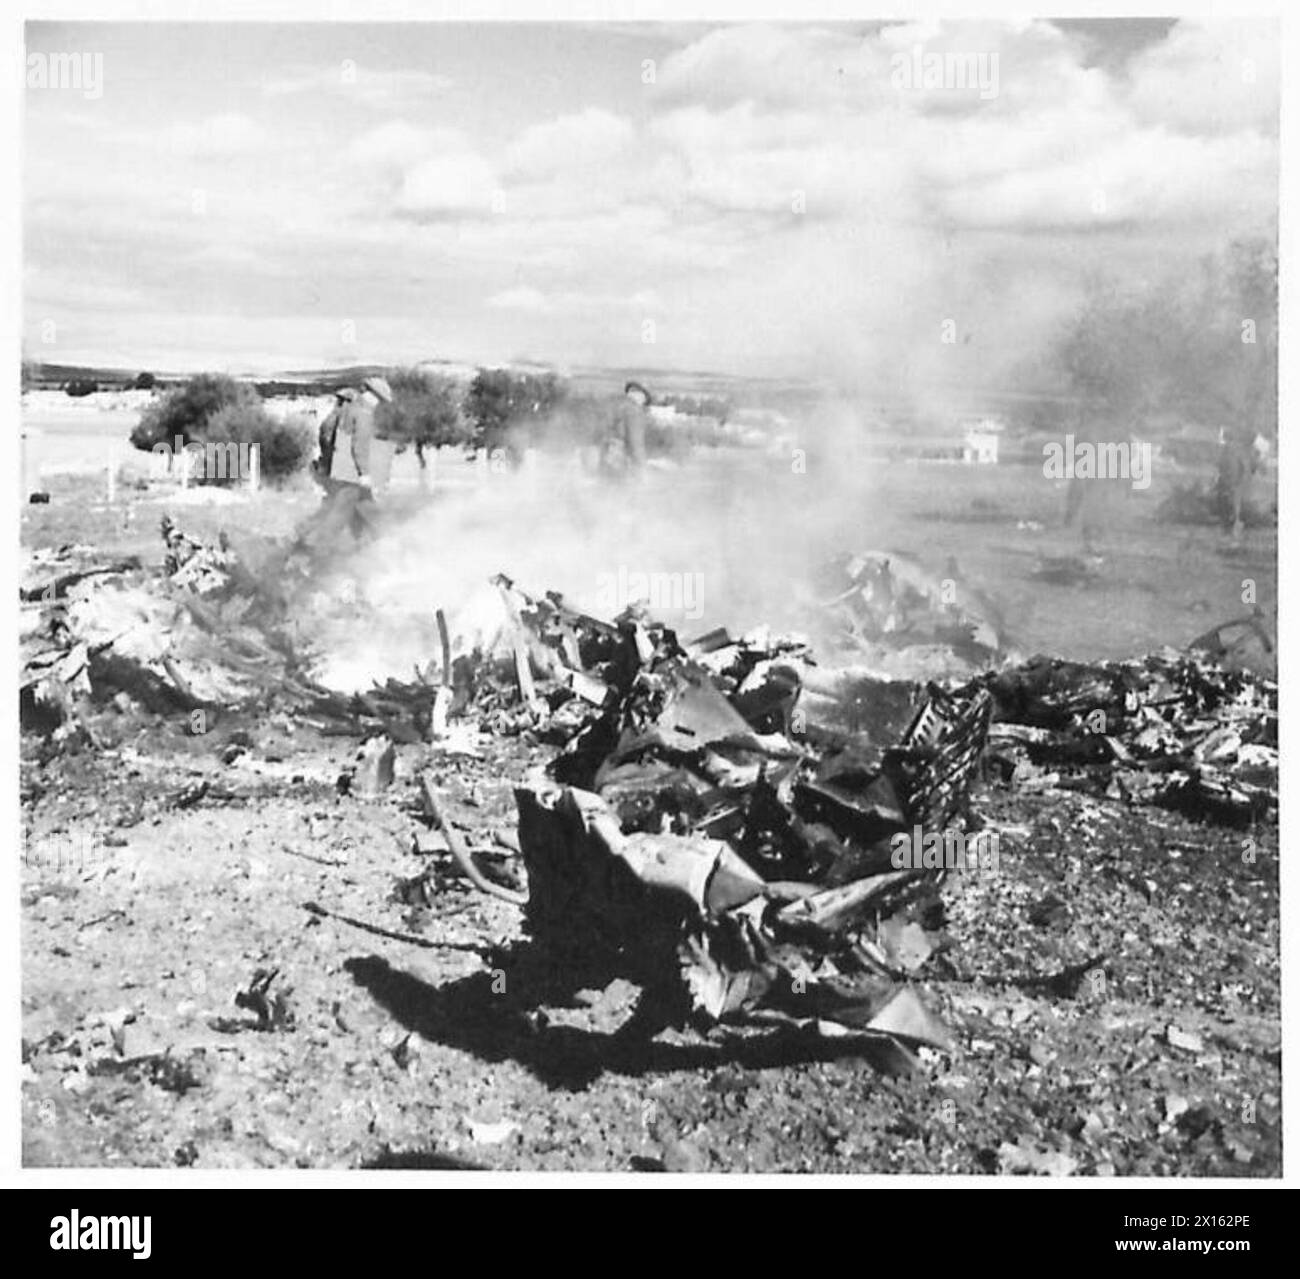 THE BRITISH ARMY IN THE TUNISIA CAMPAIGN, NOVEMBER 1942-MAY 1943 - One of the two JU 88s shot down in Bou Arada, the crew were burnt to death. The battle at Bou Arada flared up again. The Germans attacked from the "Two Tree Hill" with tanks and infantry. Troops of the British V Corps in position on the "Green Hill" (about 5000 yards away from the "Two Tree Hill") held and beat back the attack. 17 German tanks were destroyed by British 25 pounder guns. The battle continued all day with Messerschmitts and Junkers dive bombing British positions. One ME and two JU 88s were shot down. 18 January 19 Stock Photo